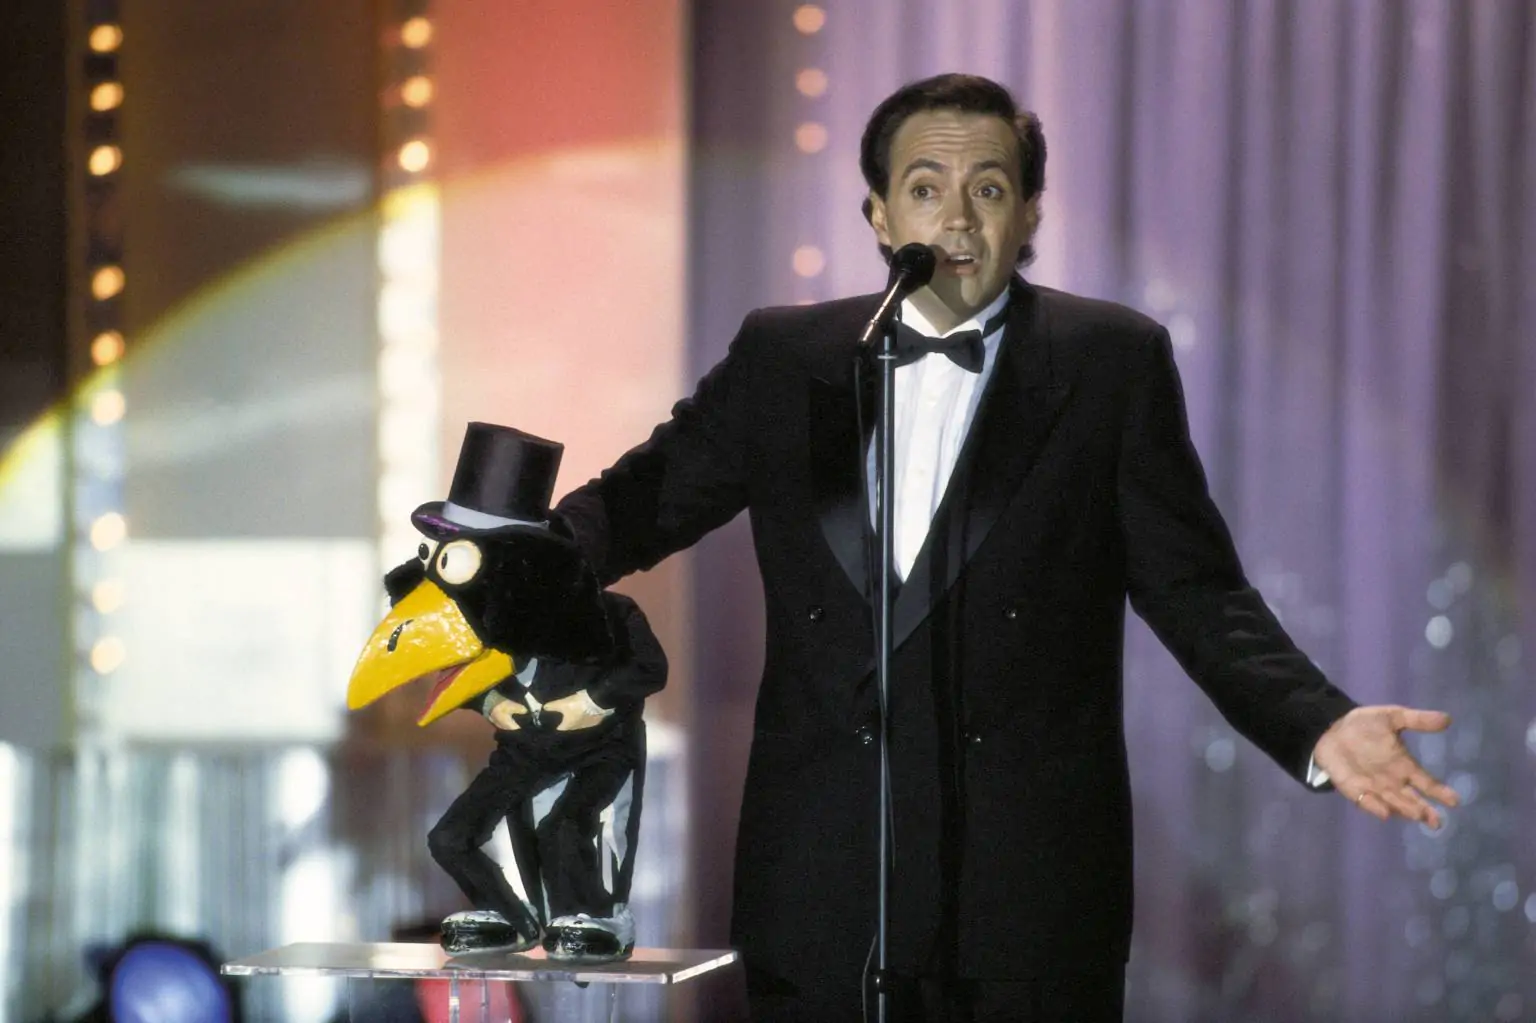 Performance of the humorist José Luis Moreno With one of his puppets